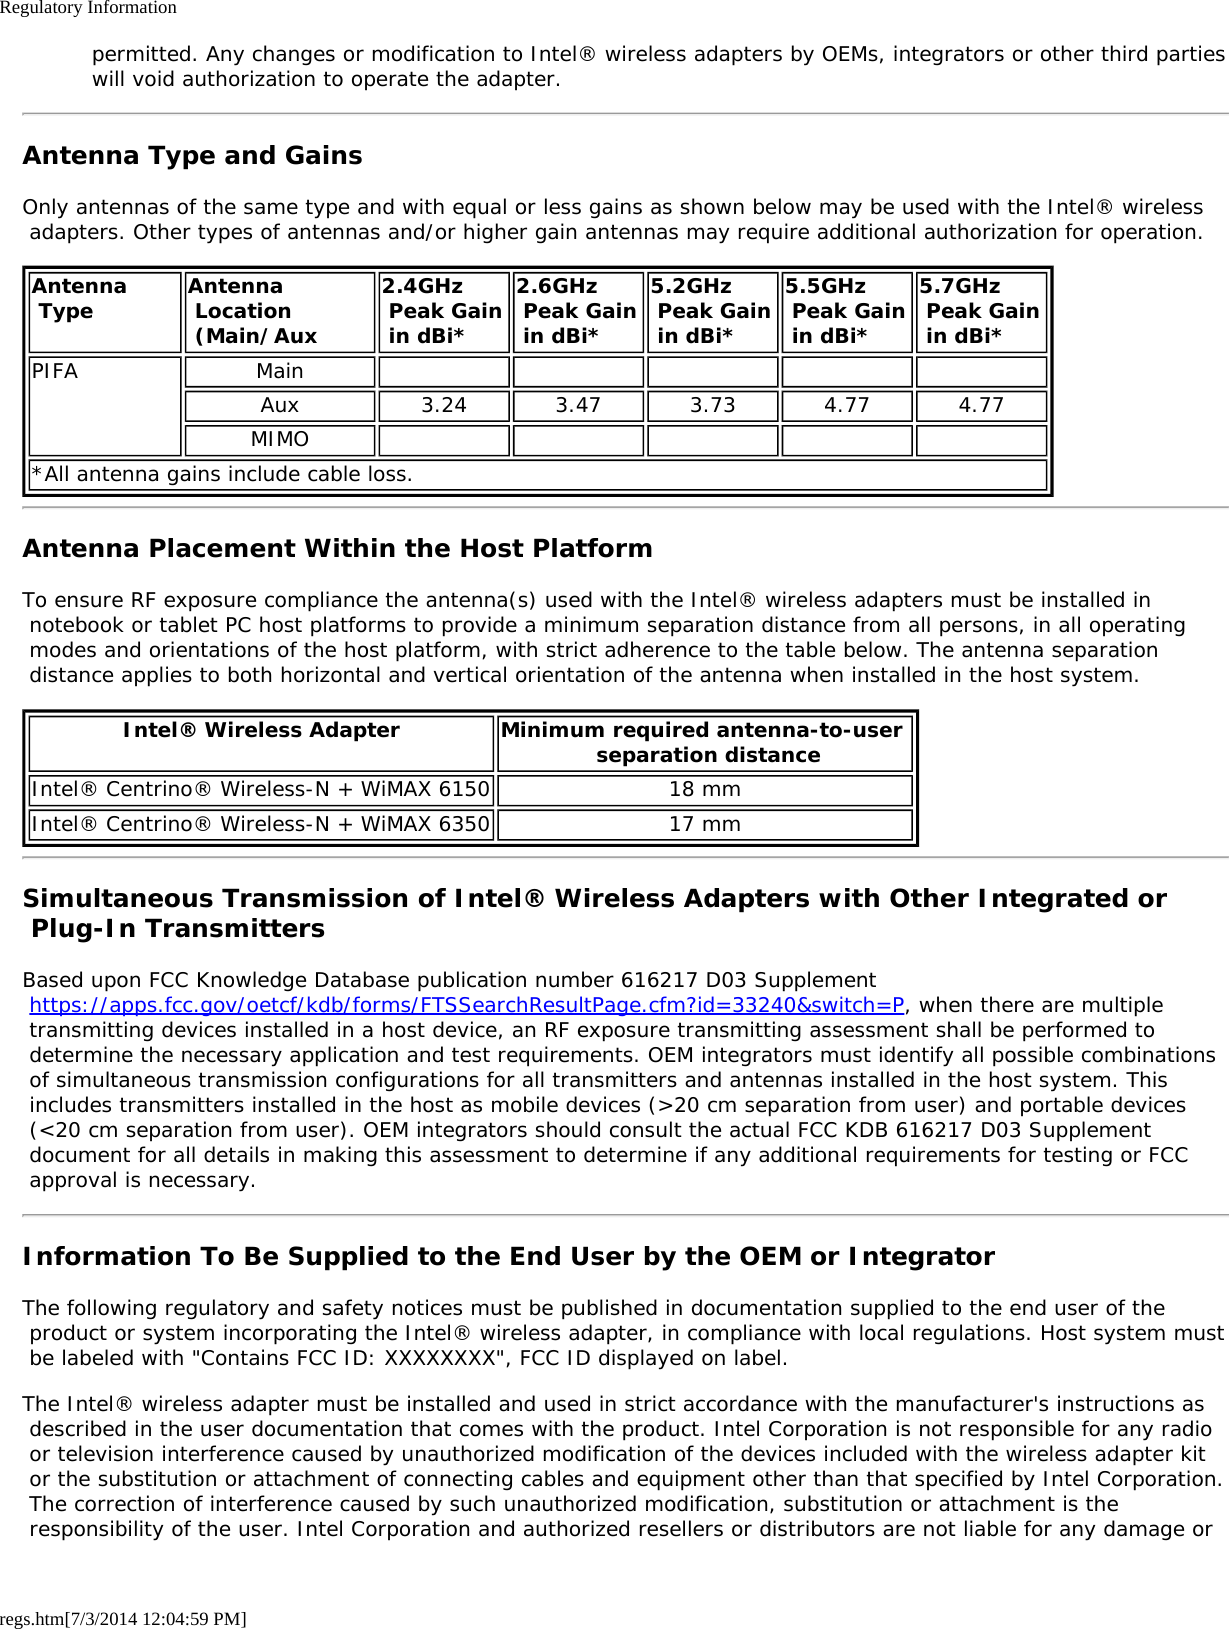 Regulatory Informationregs.htm[7/3/2014 12:04:59 PM] permitted. Any changes or modification to Intel® wireless adapters by OEMs, integrators or other third parties will void authorization to operate the adapter.Antenna Type and GainsOnly antennas of the same type and with equal or less gains as shown below may be used with the Intel® wireless adapters. Other types of antennas and/or higher gain antennas may require additional authorization for operation.Antenna Type Antenna Location (Main/Aux2.4GHz Peak Gain in dBi*2.6GHz Peak Gain in dBi*5.2GHz Peak Gain in dBi*5.5GHz Peak Gain in dBi*5.7GHz  Peak Gain in dBi*PIFA MainAux 3.24 3.47 3.73 4.77 4.77MIMO*All antenna gains include cable loss.Antenna Placement Within the Host PlatformTo ensure RF exposure compliance the antenna(s) used with the Intel® wireless adapters must be installed in notebook or tablet PC host platforms to provide a minimum separation distance from all persons, in all operating modes and orientations of the host platform, with strict adherence to the table below. The antenna separation distance applies to both horizontal and vertical orientation of the antenna when installed in the host system.Intel® Wireless Adapter Minimum required antenna-to-user  separation distanceIntel® Centrino® Wireless-N + WiMAX 6150 18 mmIntel® Centrino® Wireless-N + WiMAX 6350 17 mmSimultaneous Transmission of Intel® Wireless Adapters with Other Integrated or Plug-In TransmittersBased upon FCC Knowledge Database publication number 616217 D03 Supplement https://apps.fcc.gov/oetcf/kdb/forms/FTSSearchResultPage.cfm?id=33240&amp;switch=P, when there are multiple transmitting devices installed in a host device, an RF exposure transmitting assessment shall be performed to determine the necessary application and test requirements. OEM integrators must identify all possible combinations of simultaneous transmission configurations for all transmitters and antennas installed in the host system. This includes transmitters installed in the host as mobile devices (&gt;20 cm separation from user) and portable devices (&lt;20 cm separation from user). OEM integrators should consult the actual FCC KDB 616217 D03 Supplement document for all details in making this assessment to determine if any additional requirements for testing or FCC approval is necessary.Information To Be Supplied to the End User by the OEM or IntegratorThe following regulatory and safety notices must be published in documentation supplied to the end user of the product or system incorporating the Intel® wireless adapter, in compliance with local regulations. Host system must be labeled with &quot;Contains FCC ID: XXXXXXXX&quot;, FCC ID displayed on label.The Intel® wireless adapter must be installed and used in strict accordance with the manufacturer&apos;s instructions as described in the user documentation that comes with the product. Intel Corporation is not responsible for any radio or television interference caused by unauthorized modification of the devices included with the wireless adapter kit or the substitution or attachment of connecting cables and equipment other than that specified by Intel Corporation. The correction of interference caused by such unauthorized modification, substitution or attachment is the responsibility of the user. Intel Corporation and authorized resellers or distributors are not liable for any damage or